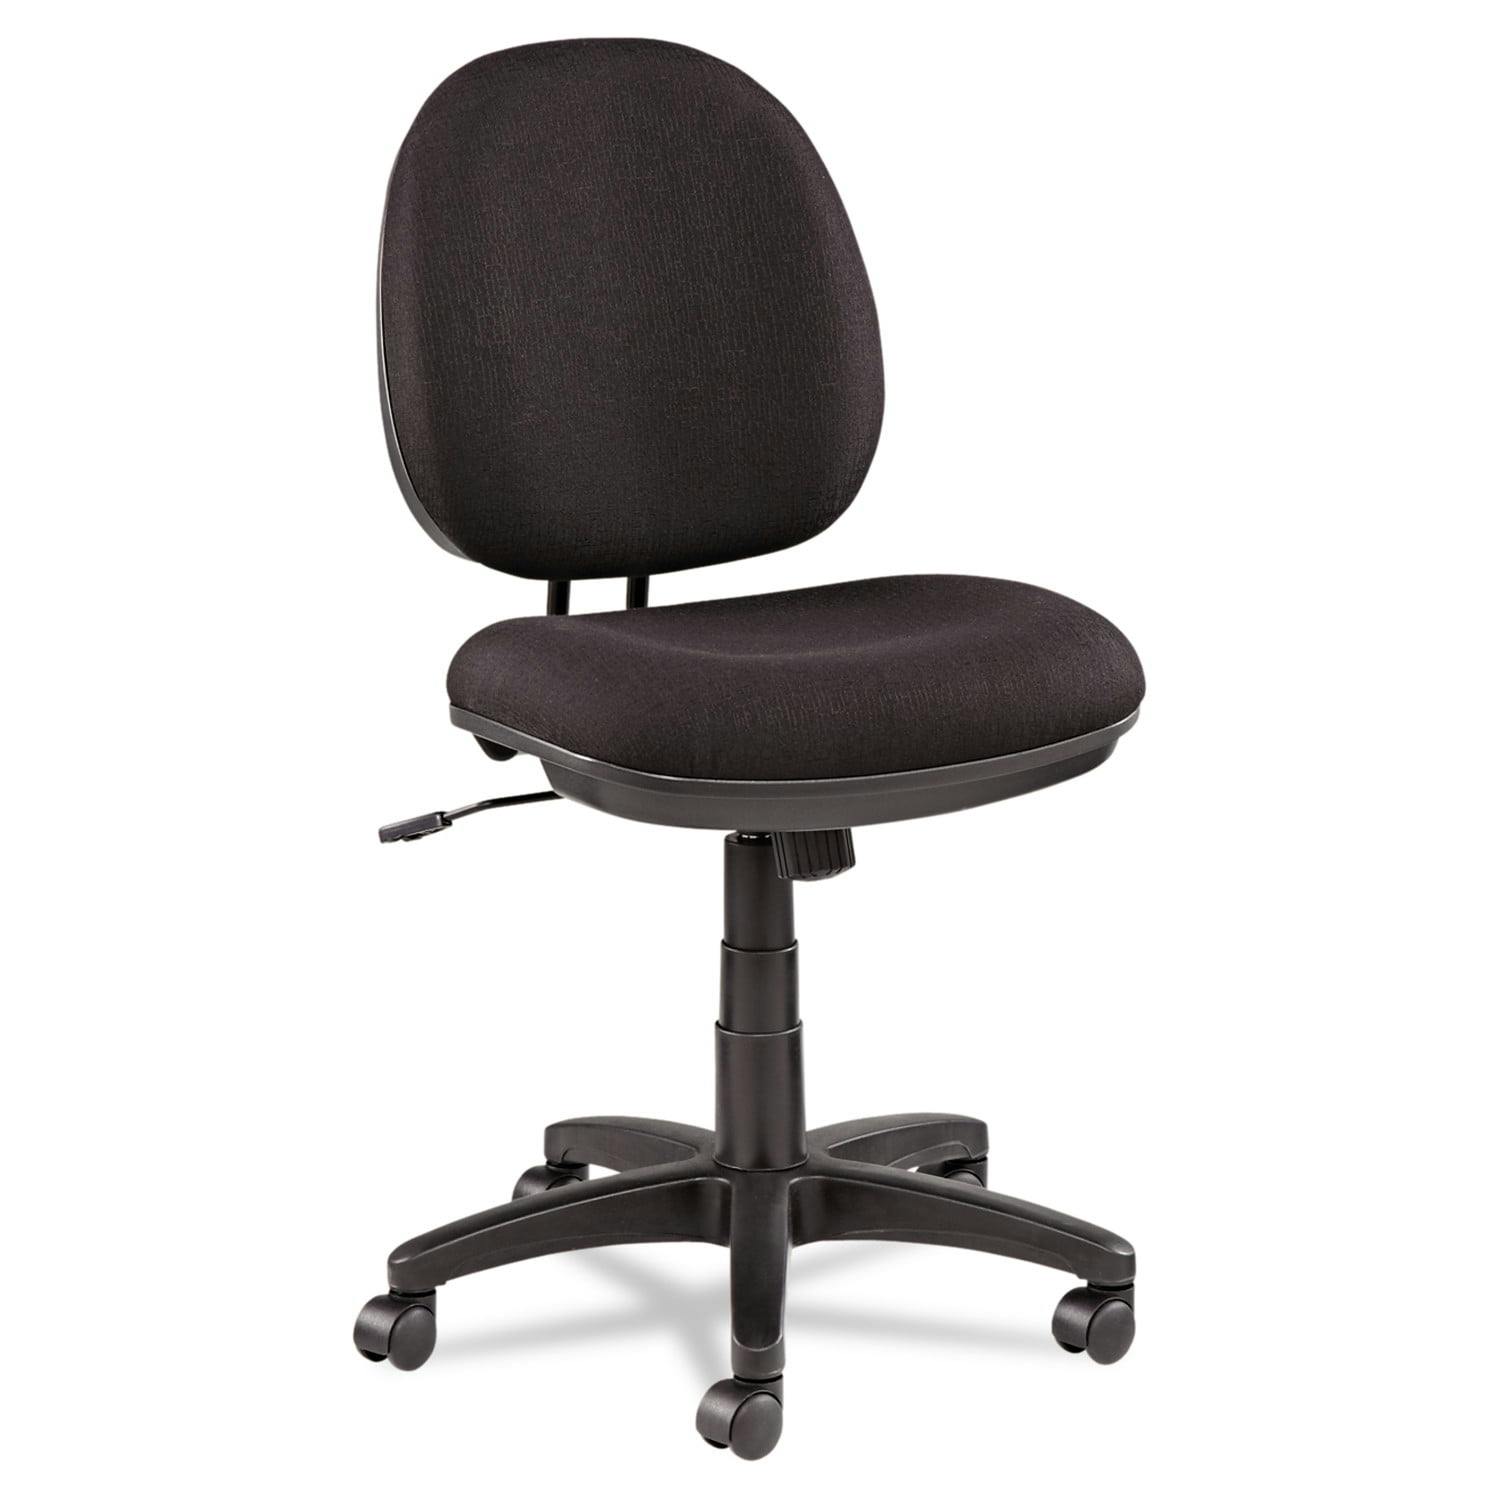 Compact Swivel Task Chair in Black Acrylic with Adjustable Height